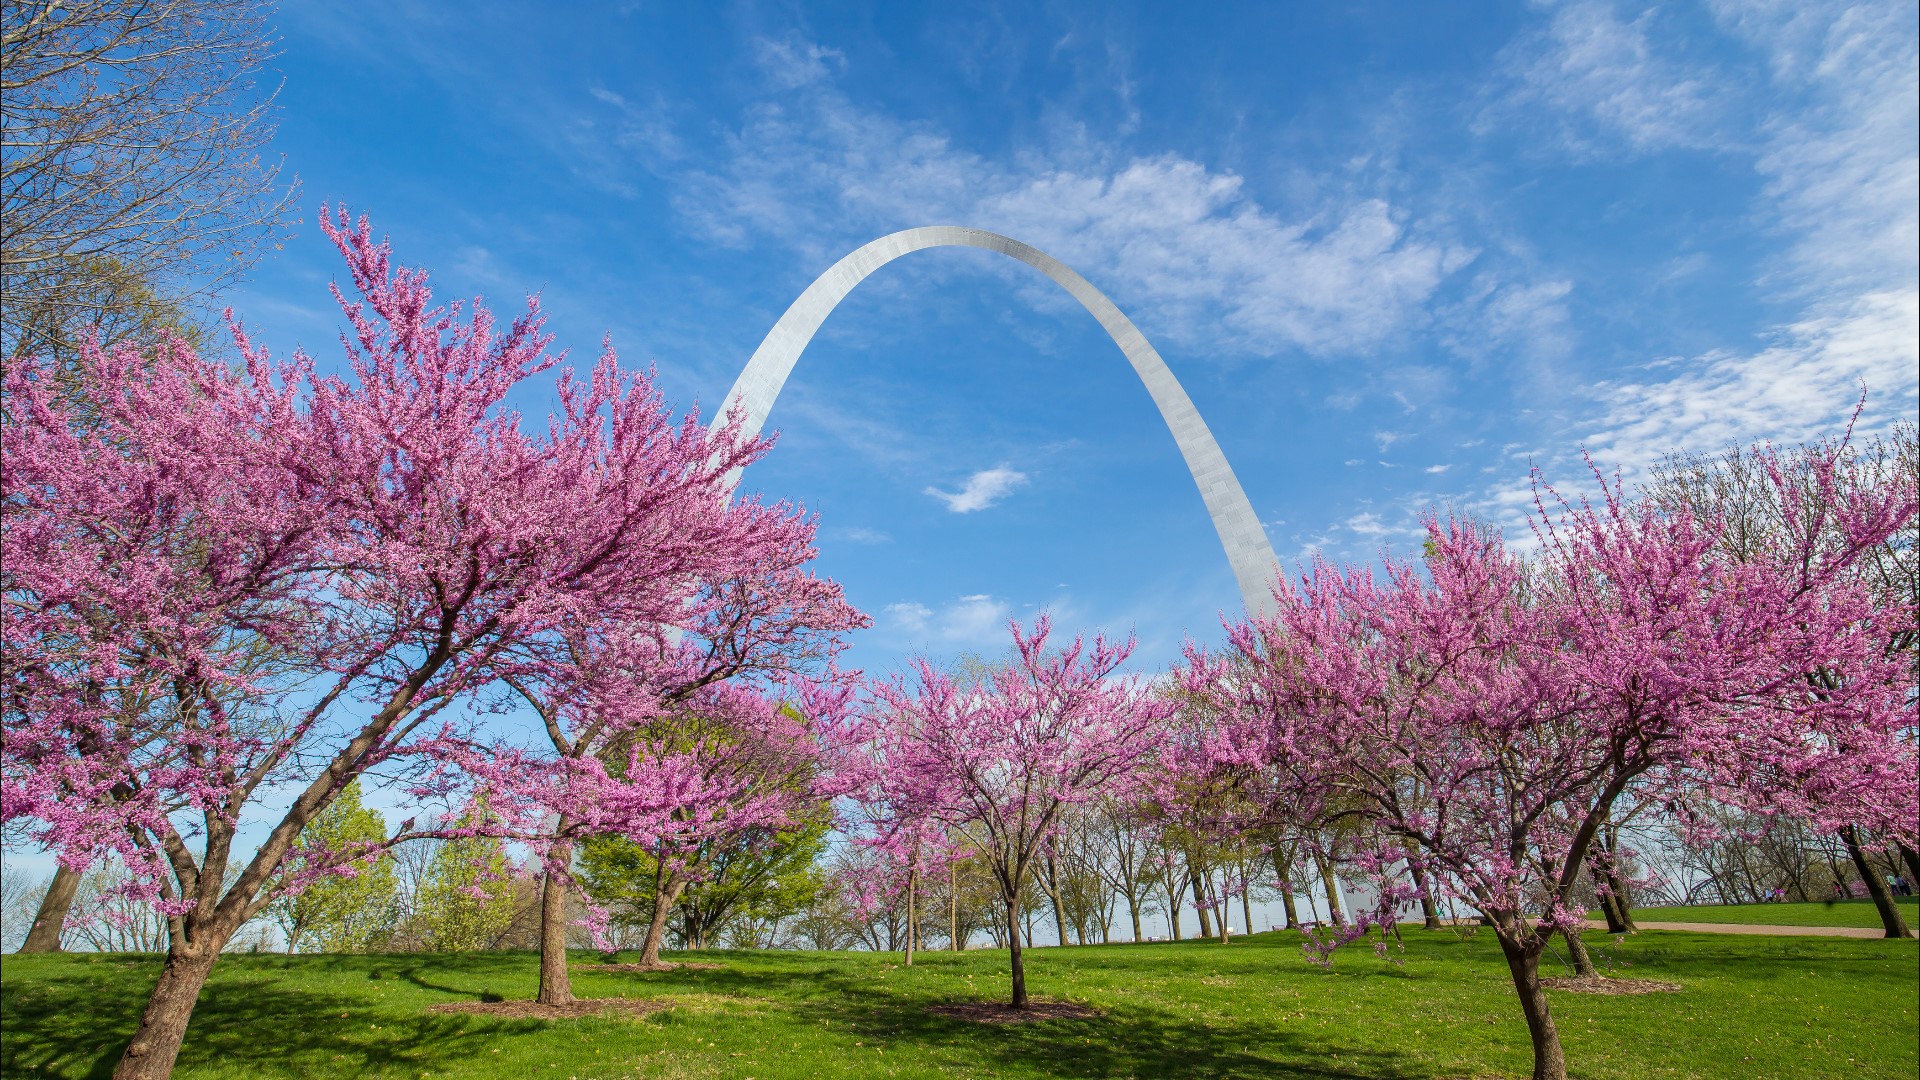 Travel + Leisure magazine named its 10 prettiest places to live in the U.S. that won't break the bank. St. Louis made No. 6 on the list.